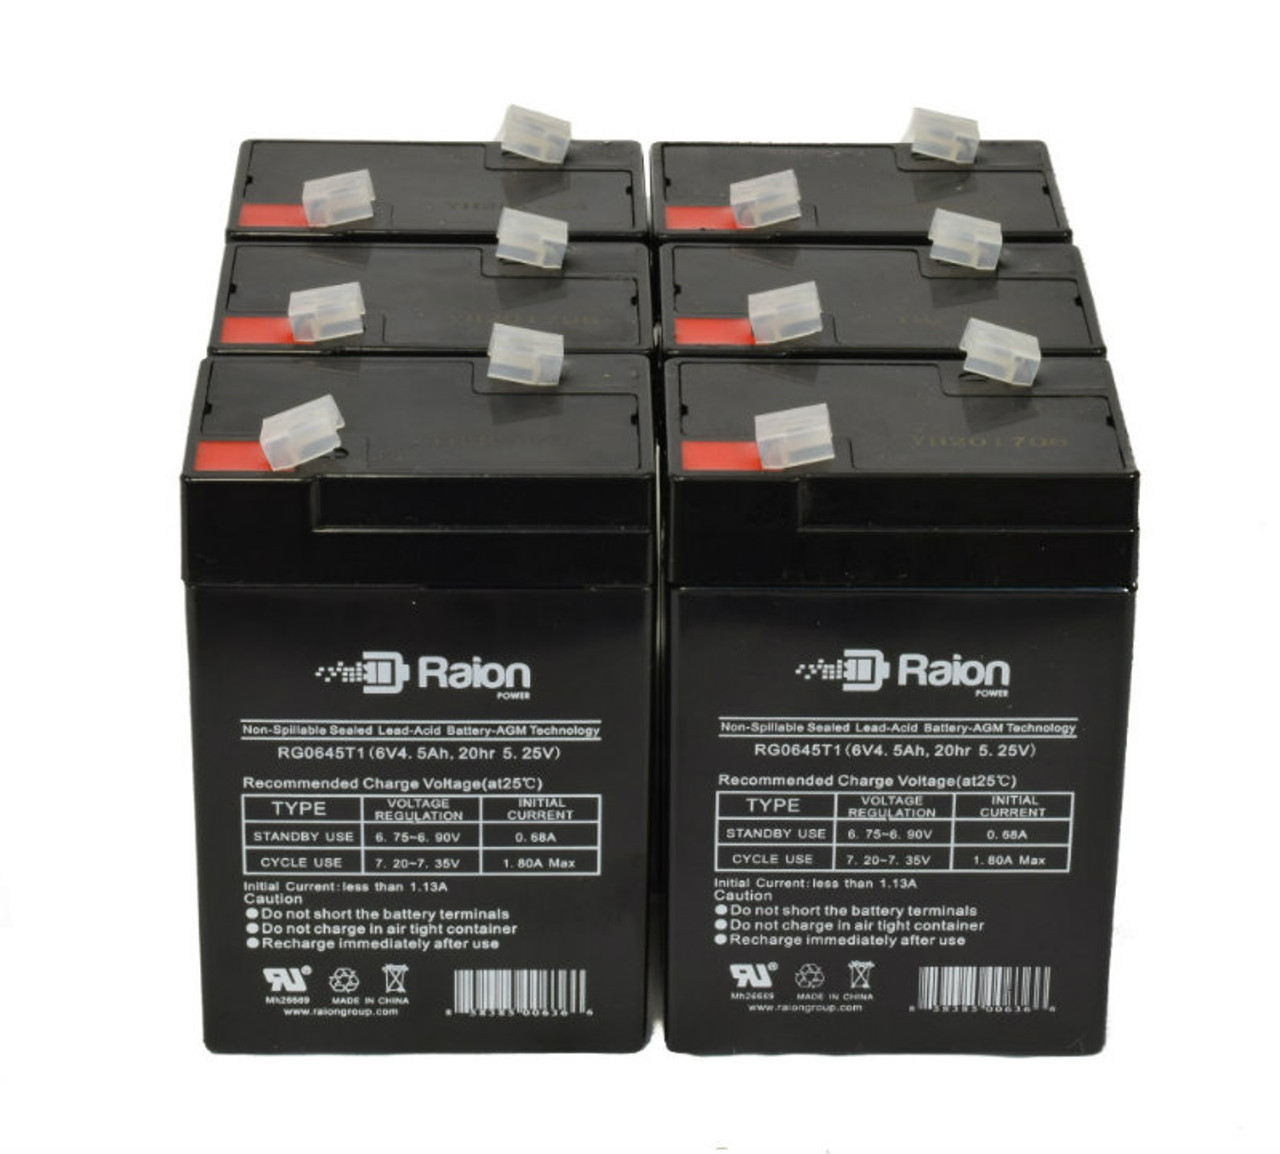 Raion Power 6 Volt 4.5Ah RG0645T1 Replacement Battery for Tianchang TC6-4-S - 6 Pack